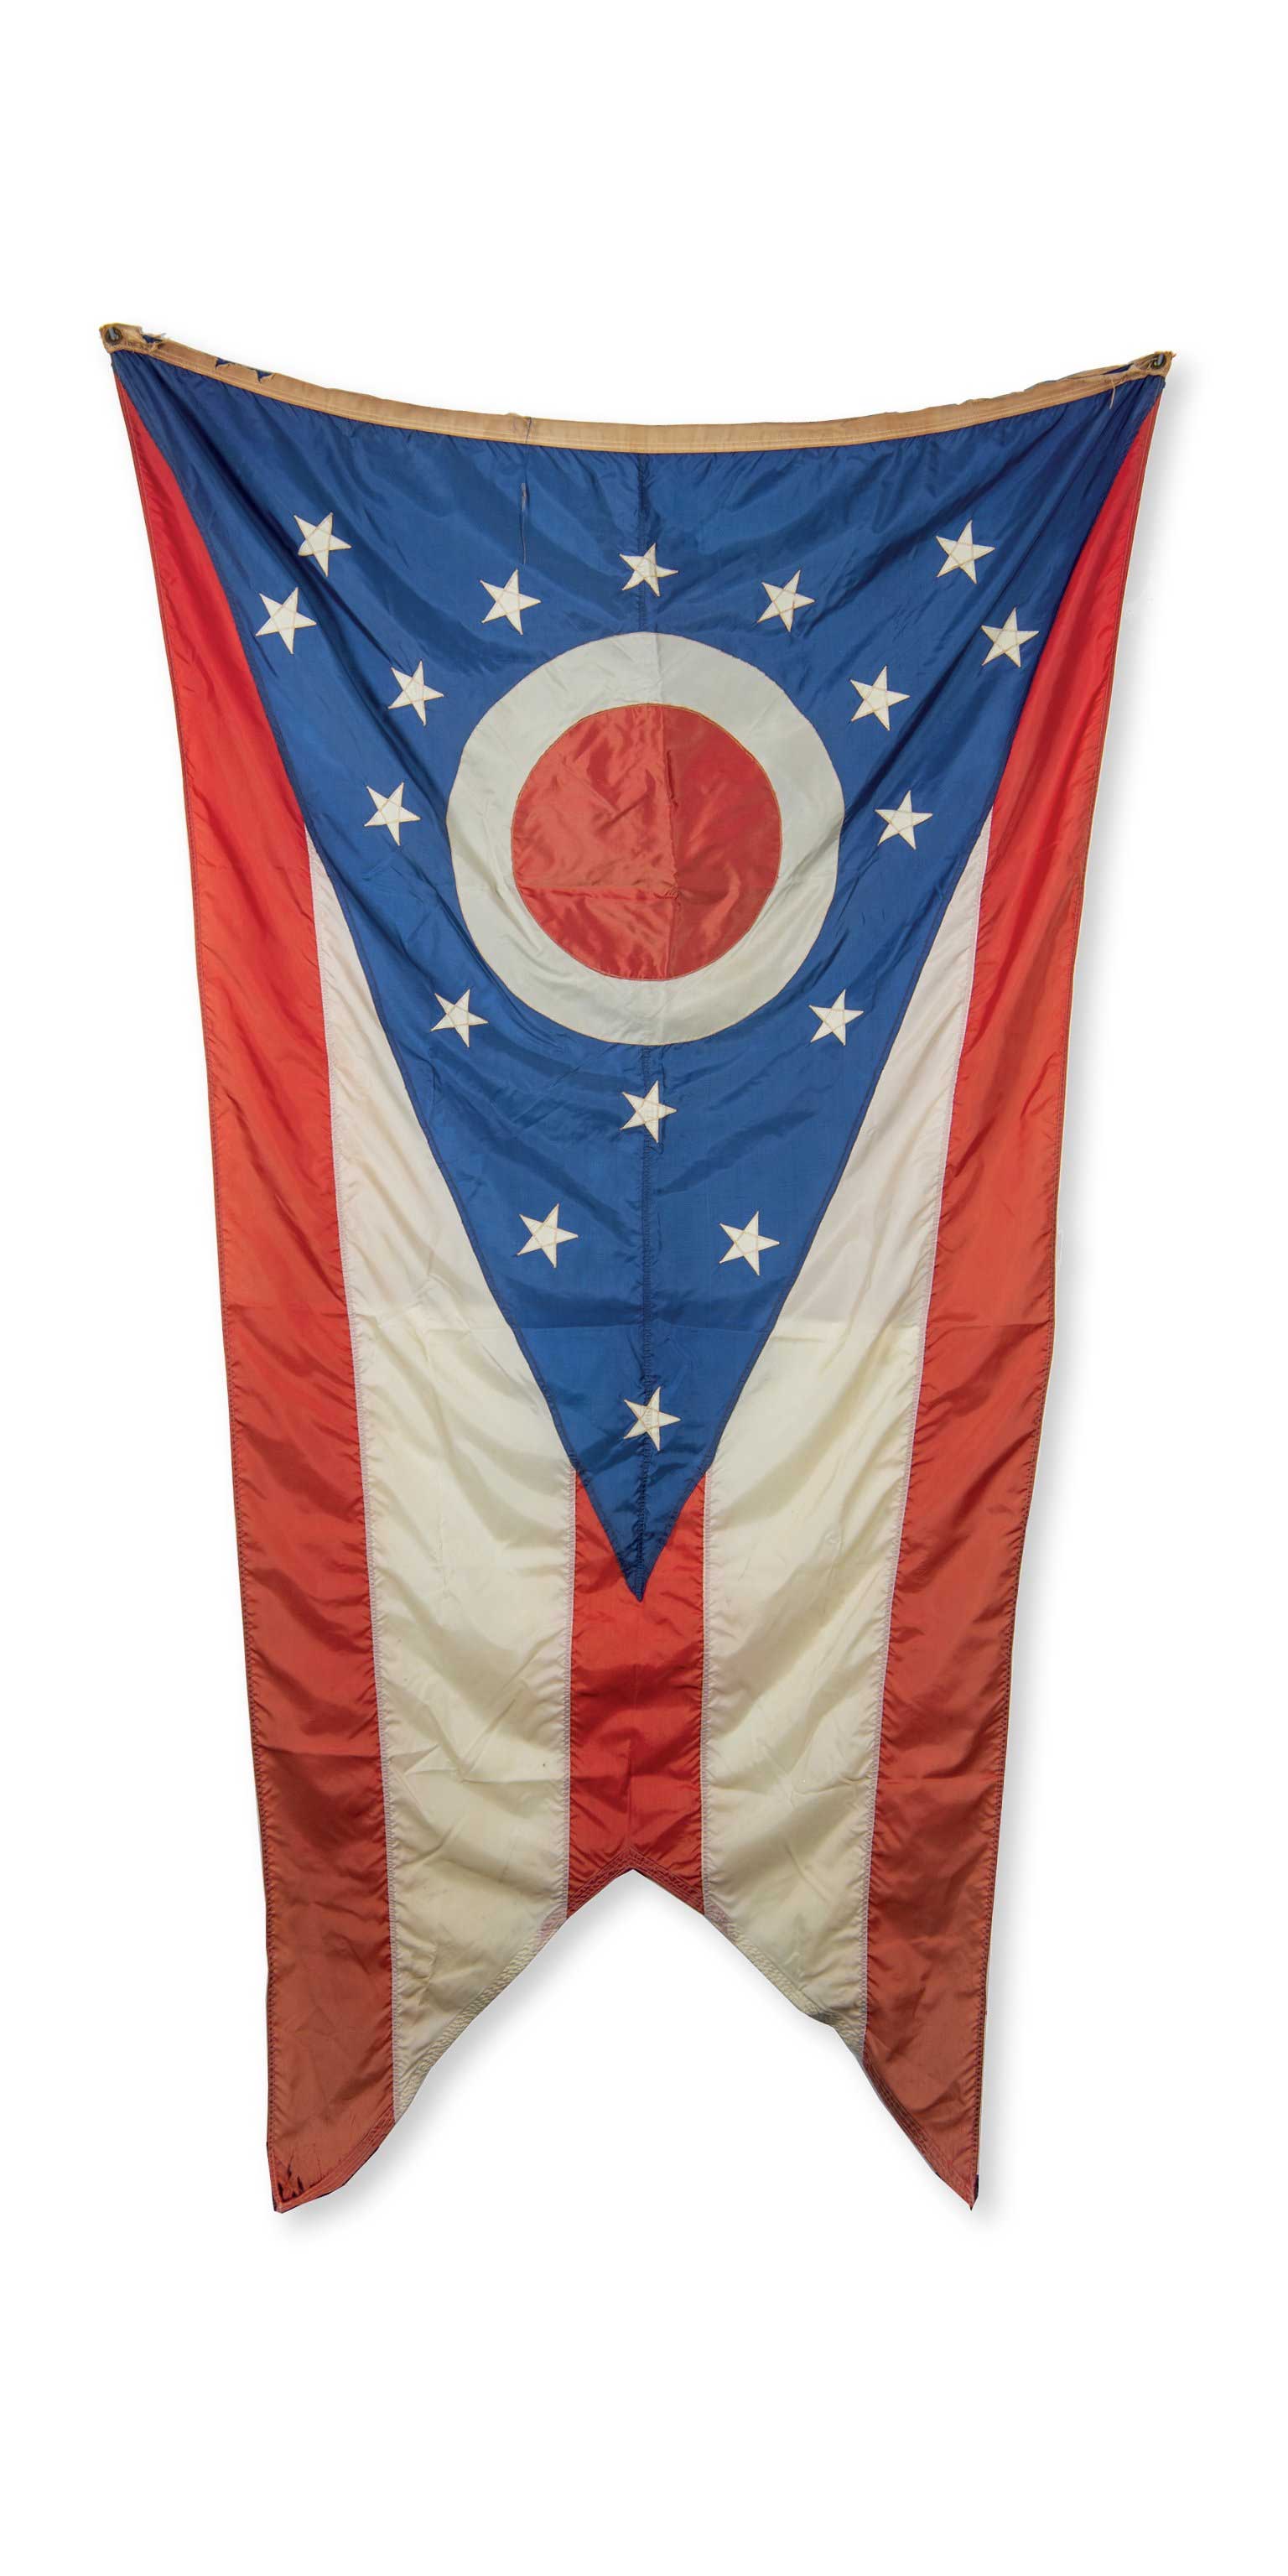 A State of Ohio flag that flew atop Cutler Hall for decades. 